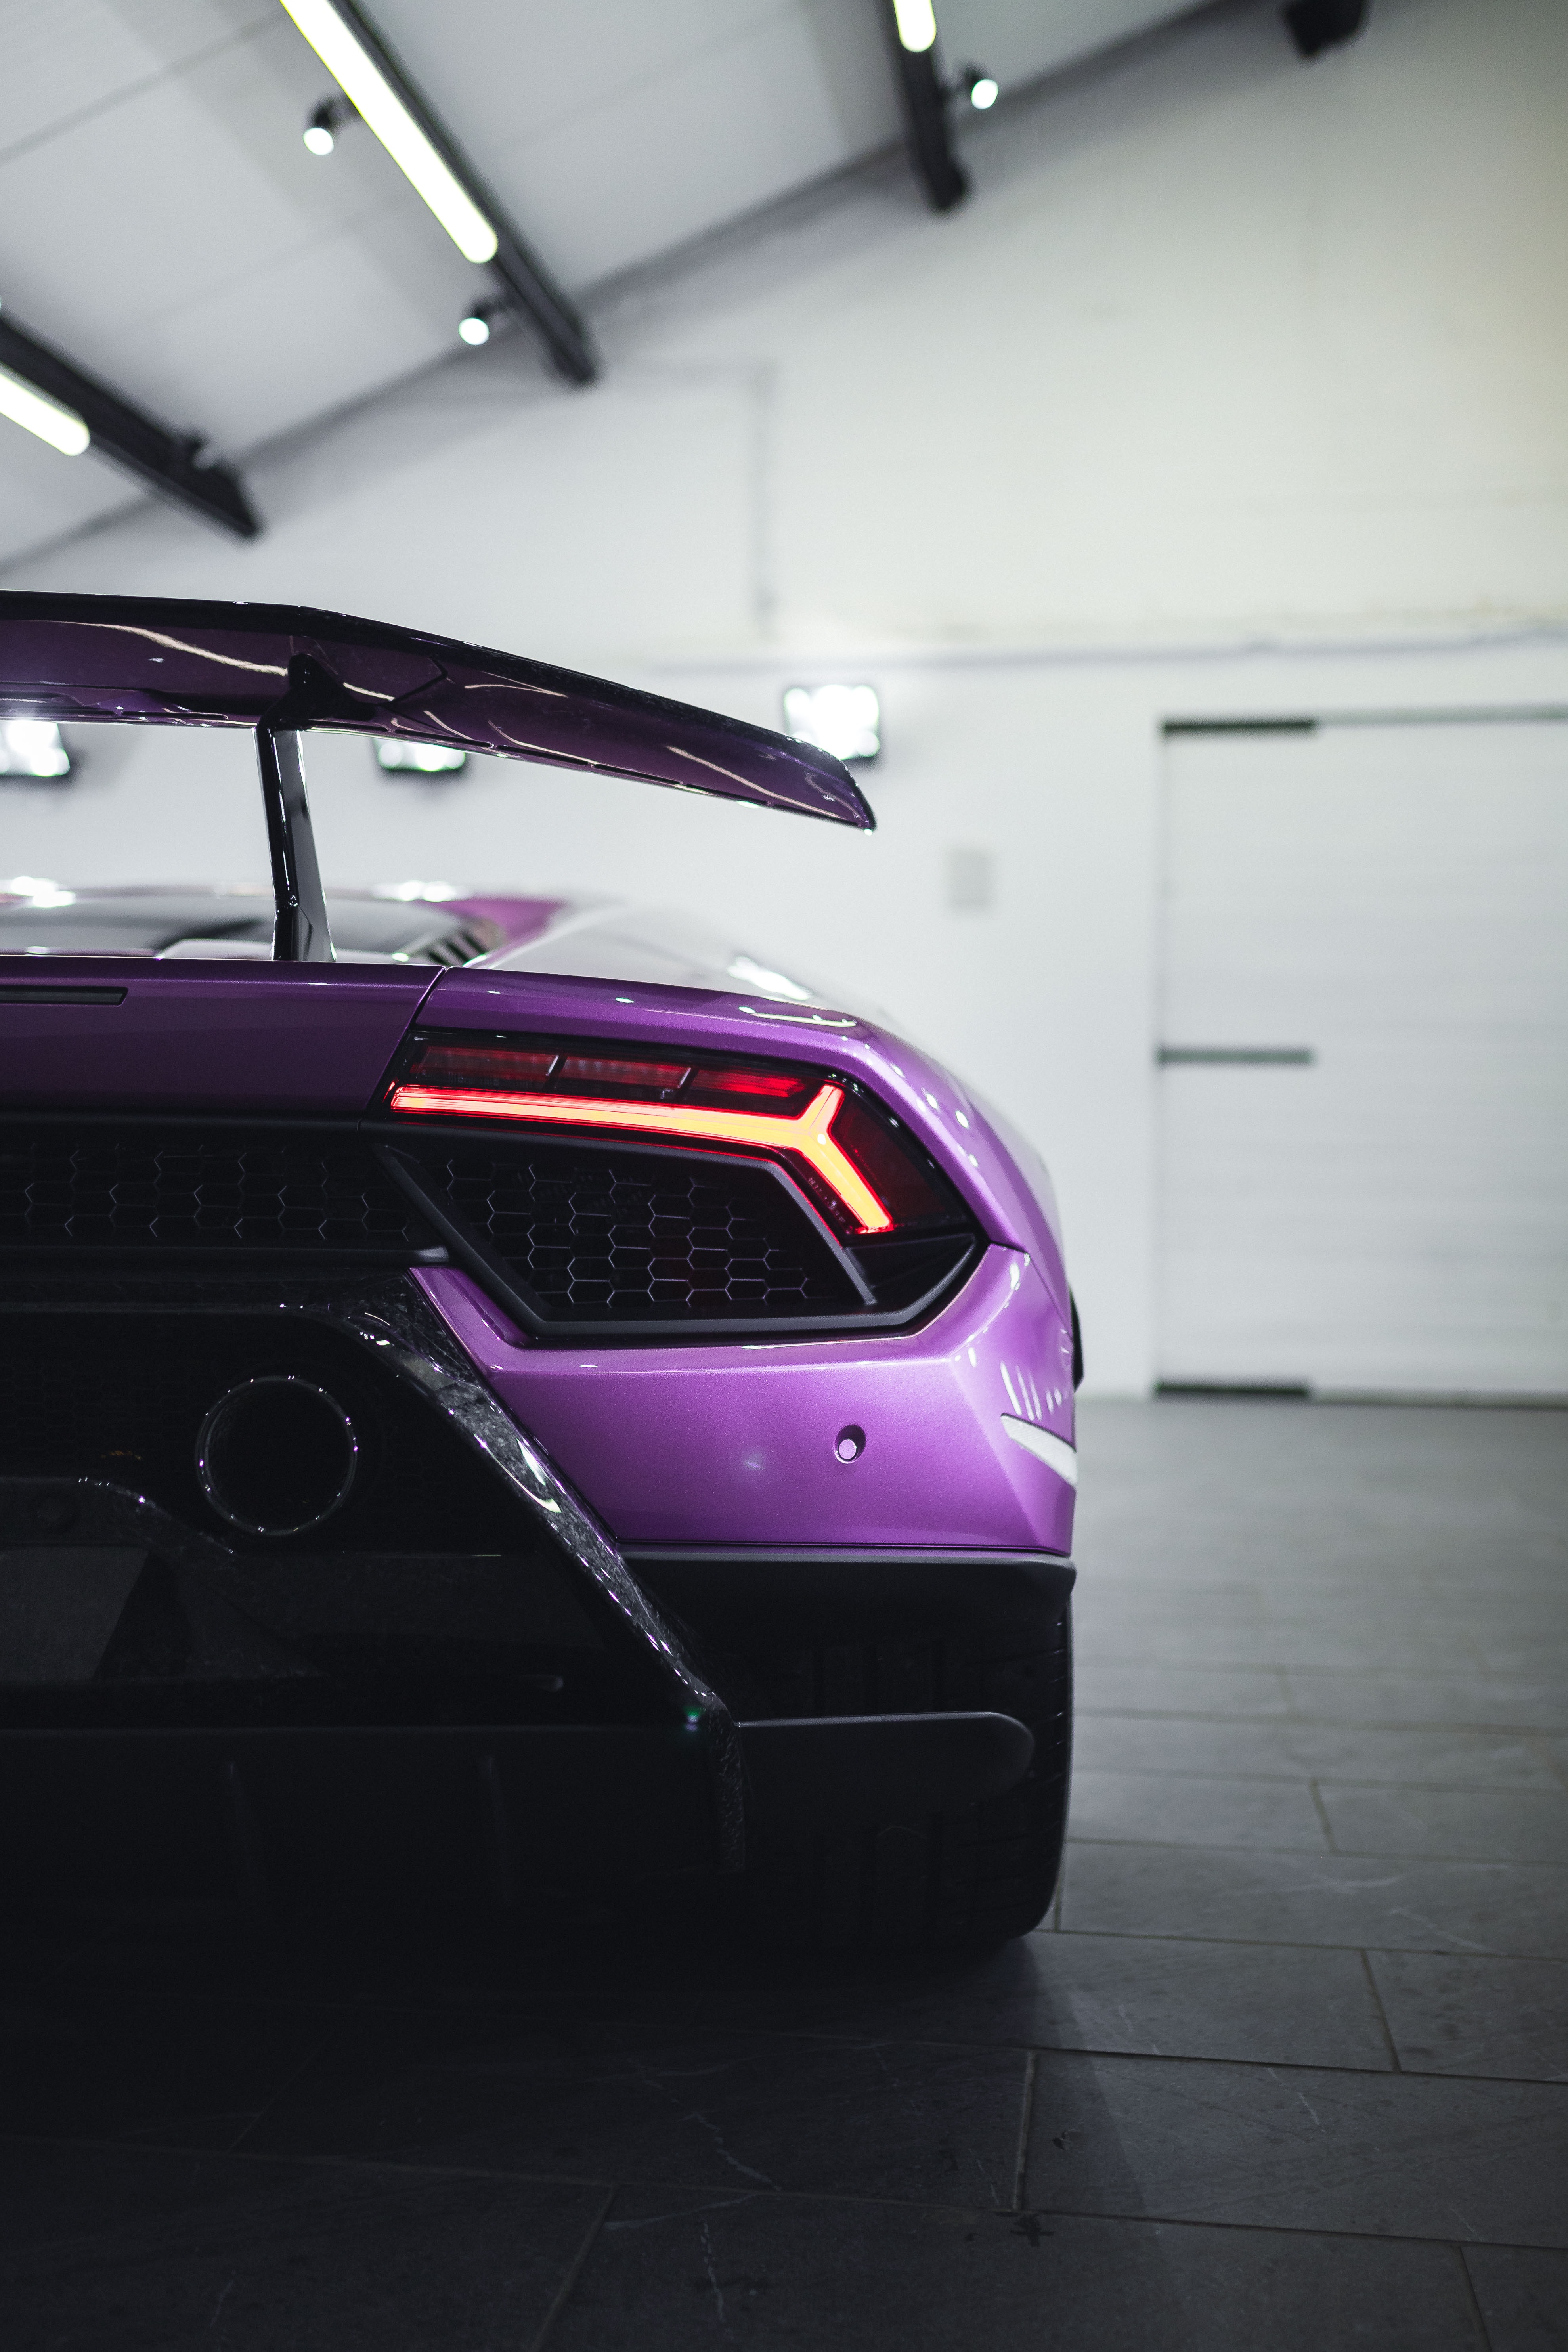 Mobile wallpaper: Supercar, Purple, Sports Car, Lamborghini, Sports, Violet, Cars, Car, Back View, Rear View, 124634 download the picture for free